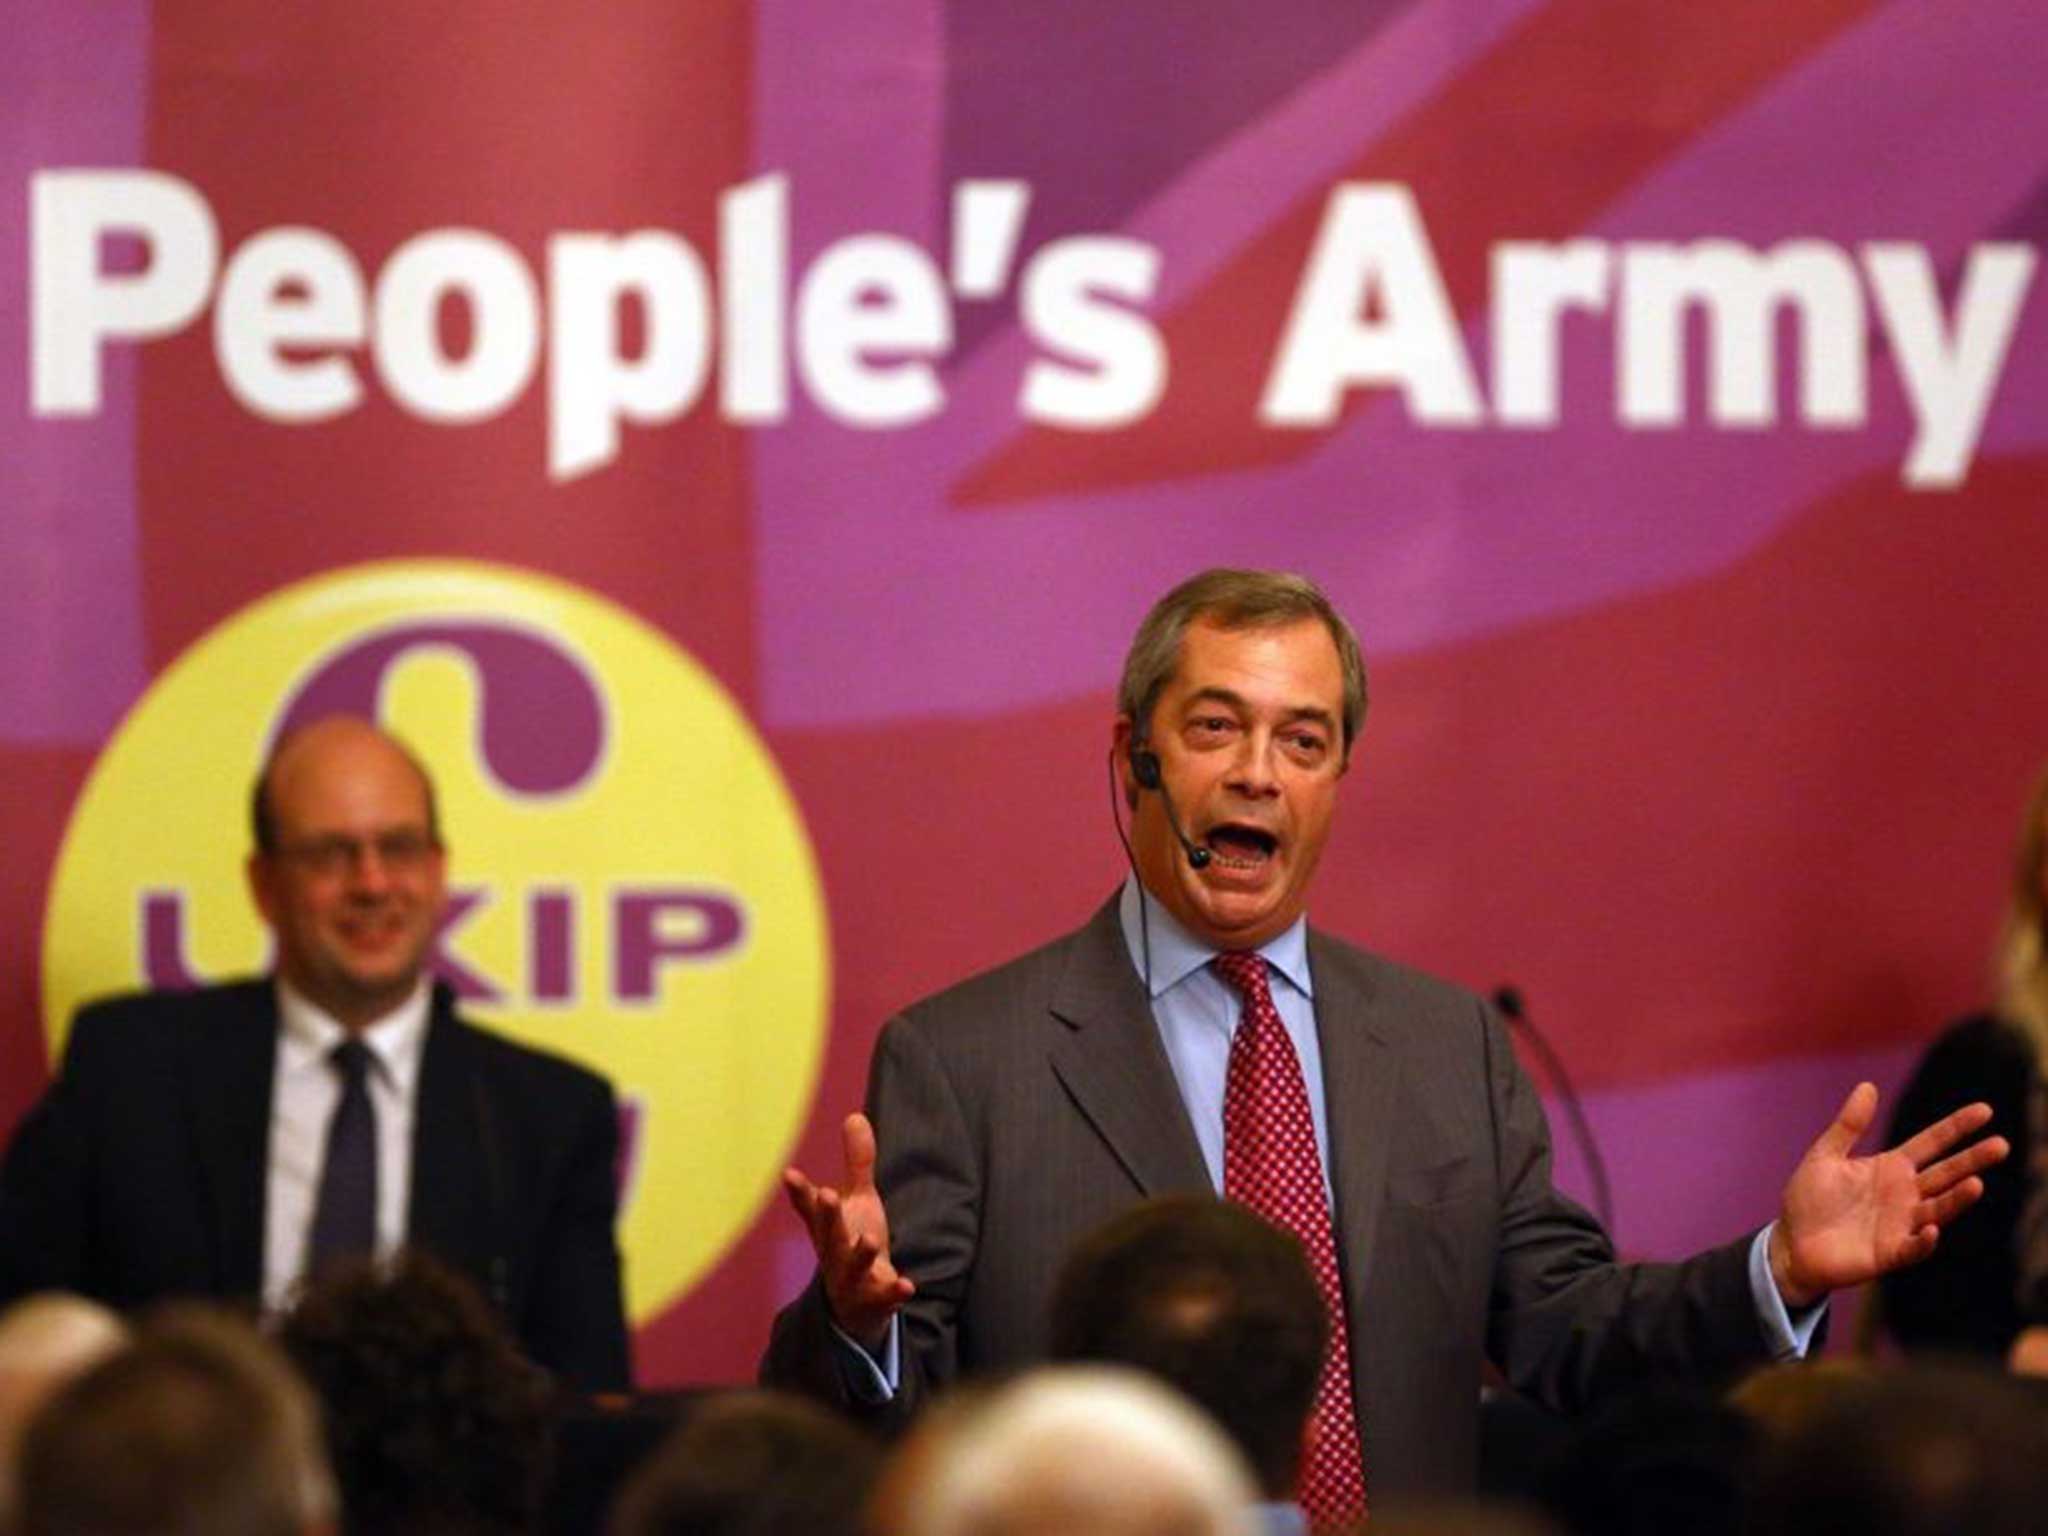 Ukip leader Nigel Farge speaking in Rochester ahead of the contested by-election